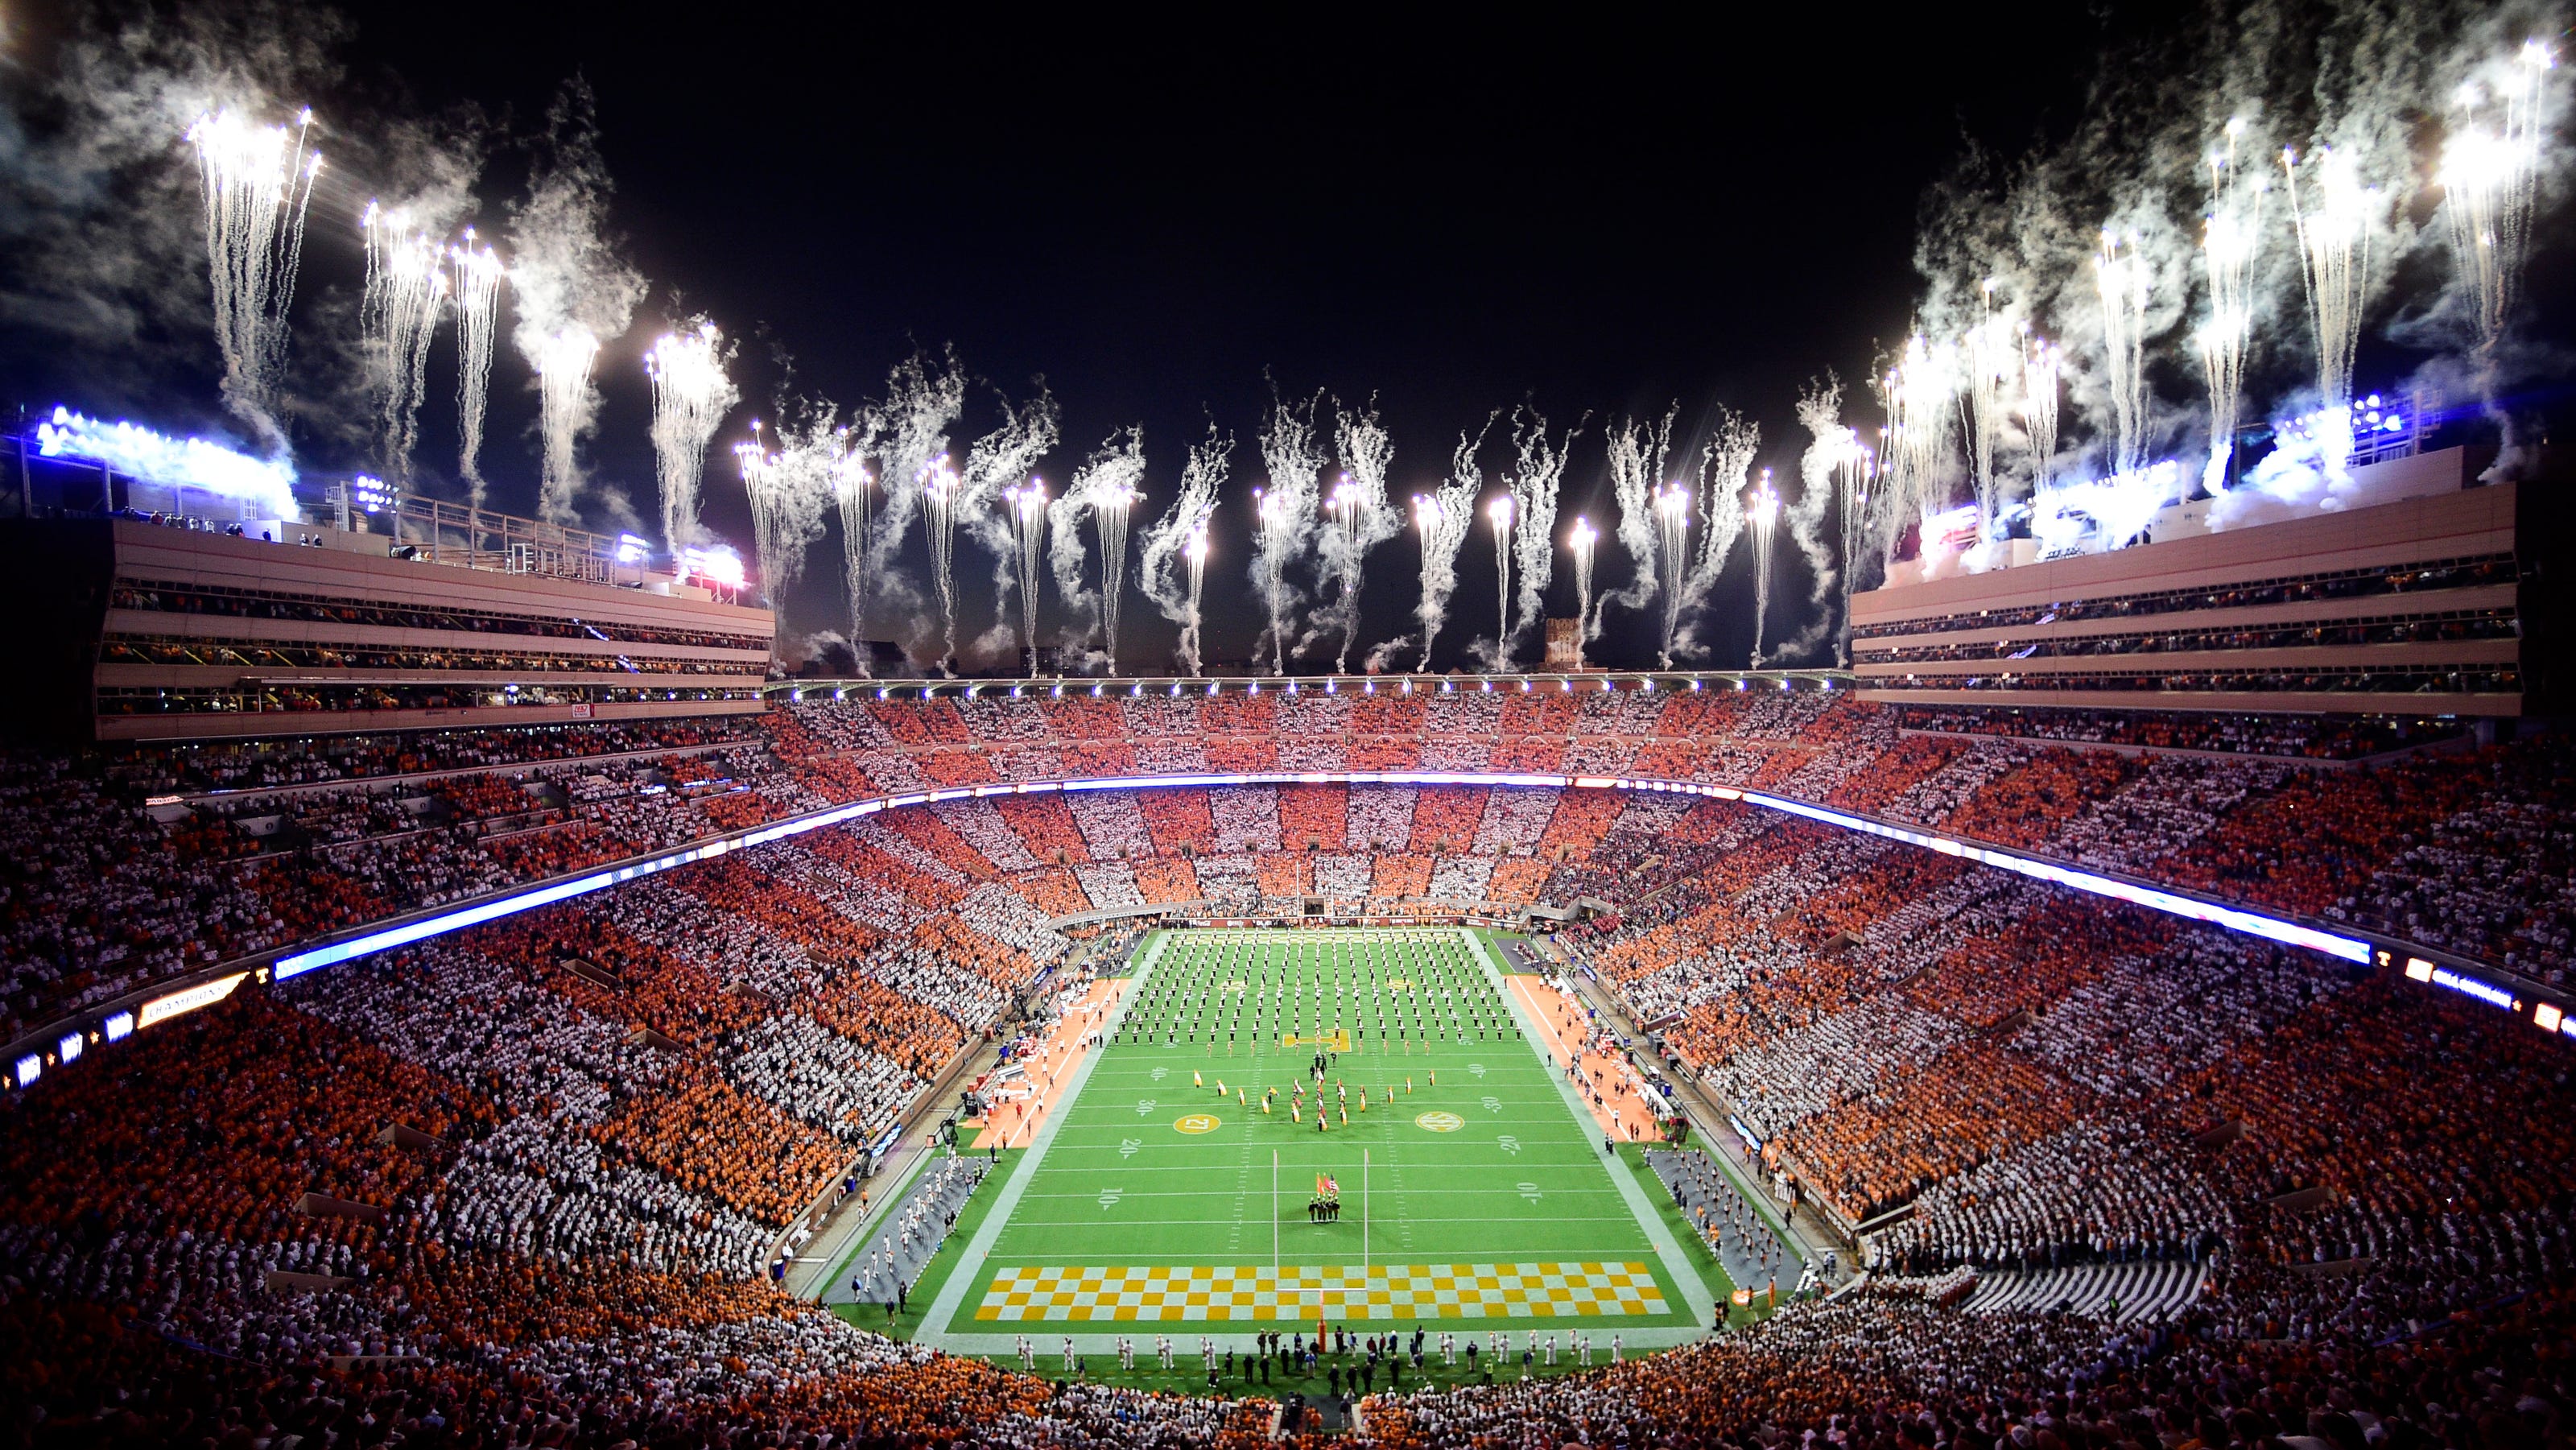 Tennessee football tickets, parking passes are all digital now